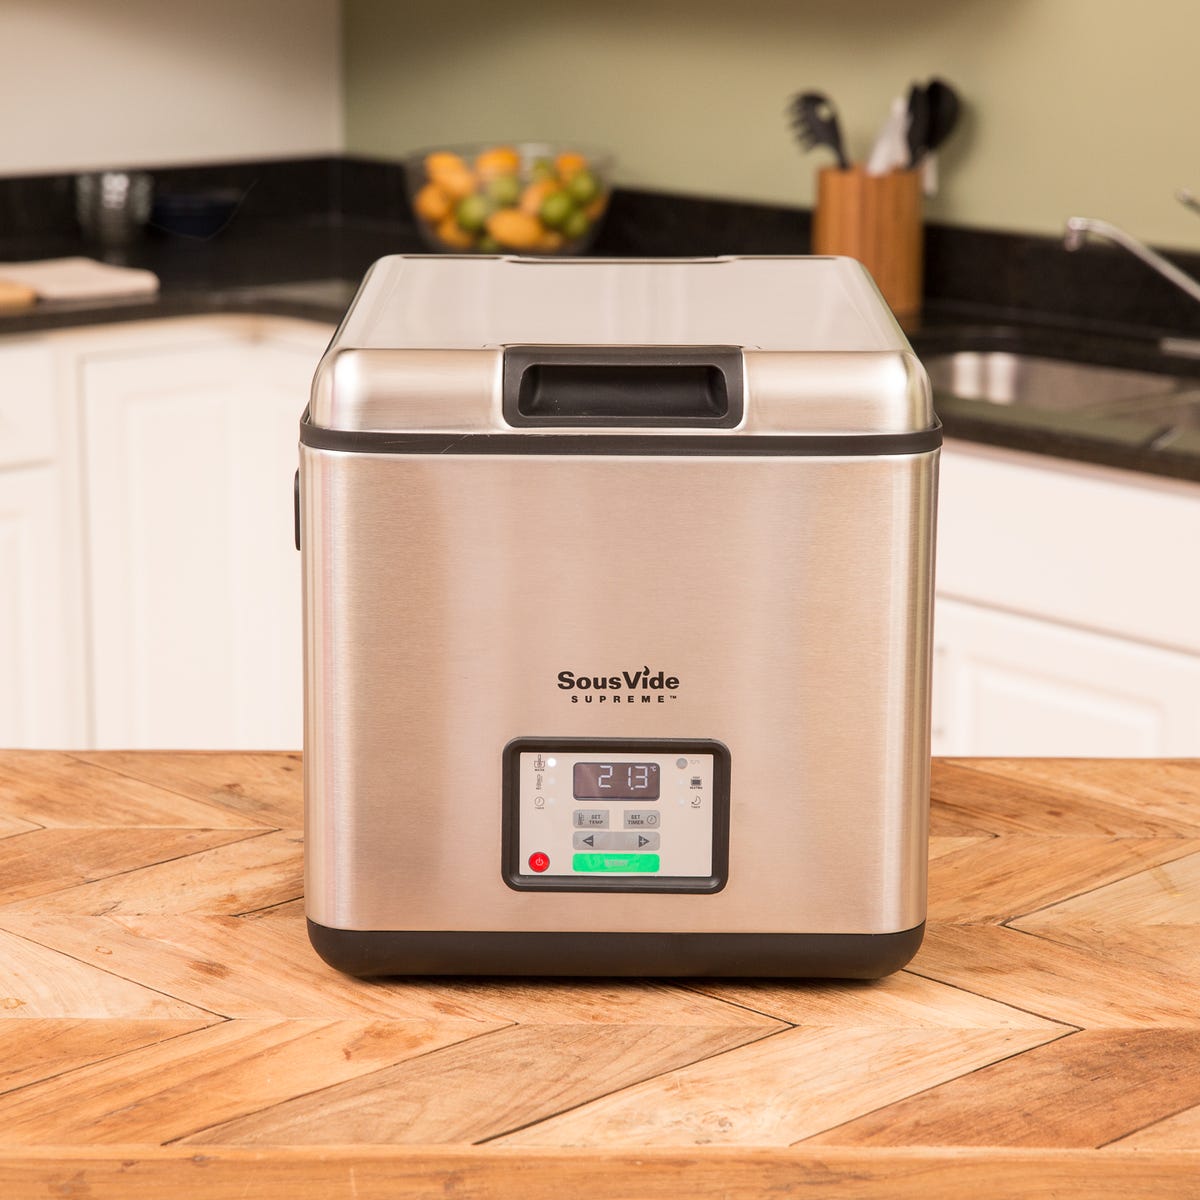 Appliance Technology SousVide Supreme review: This bulky sous vide cooker isn't Supreme - CNET